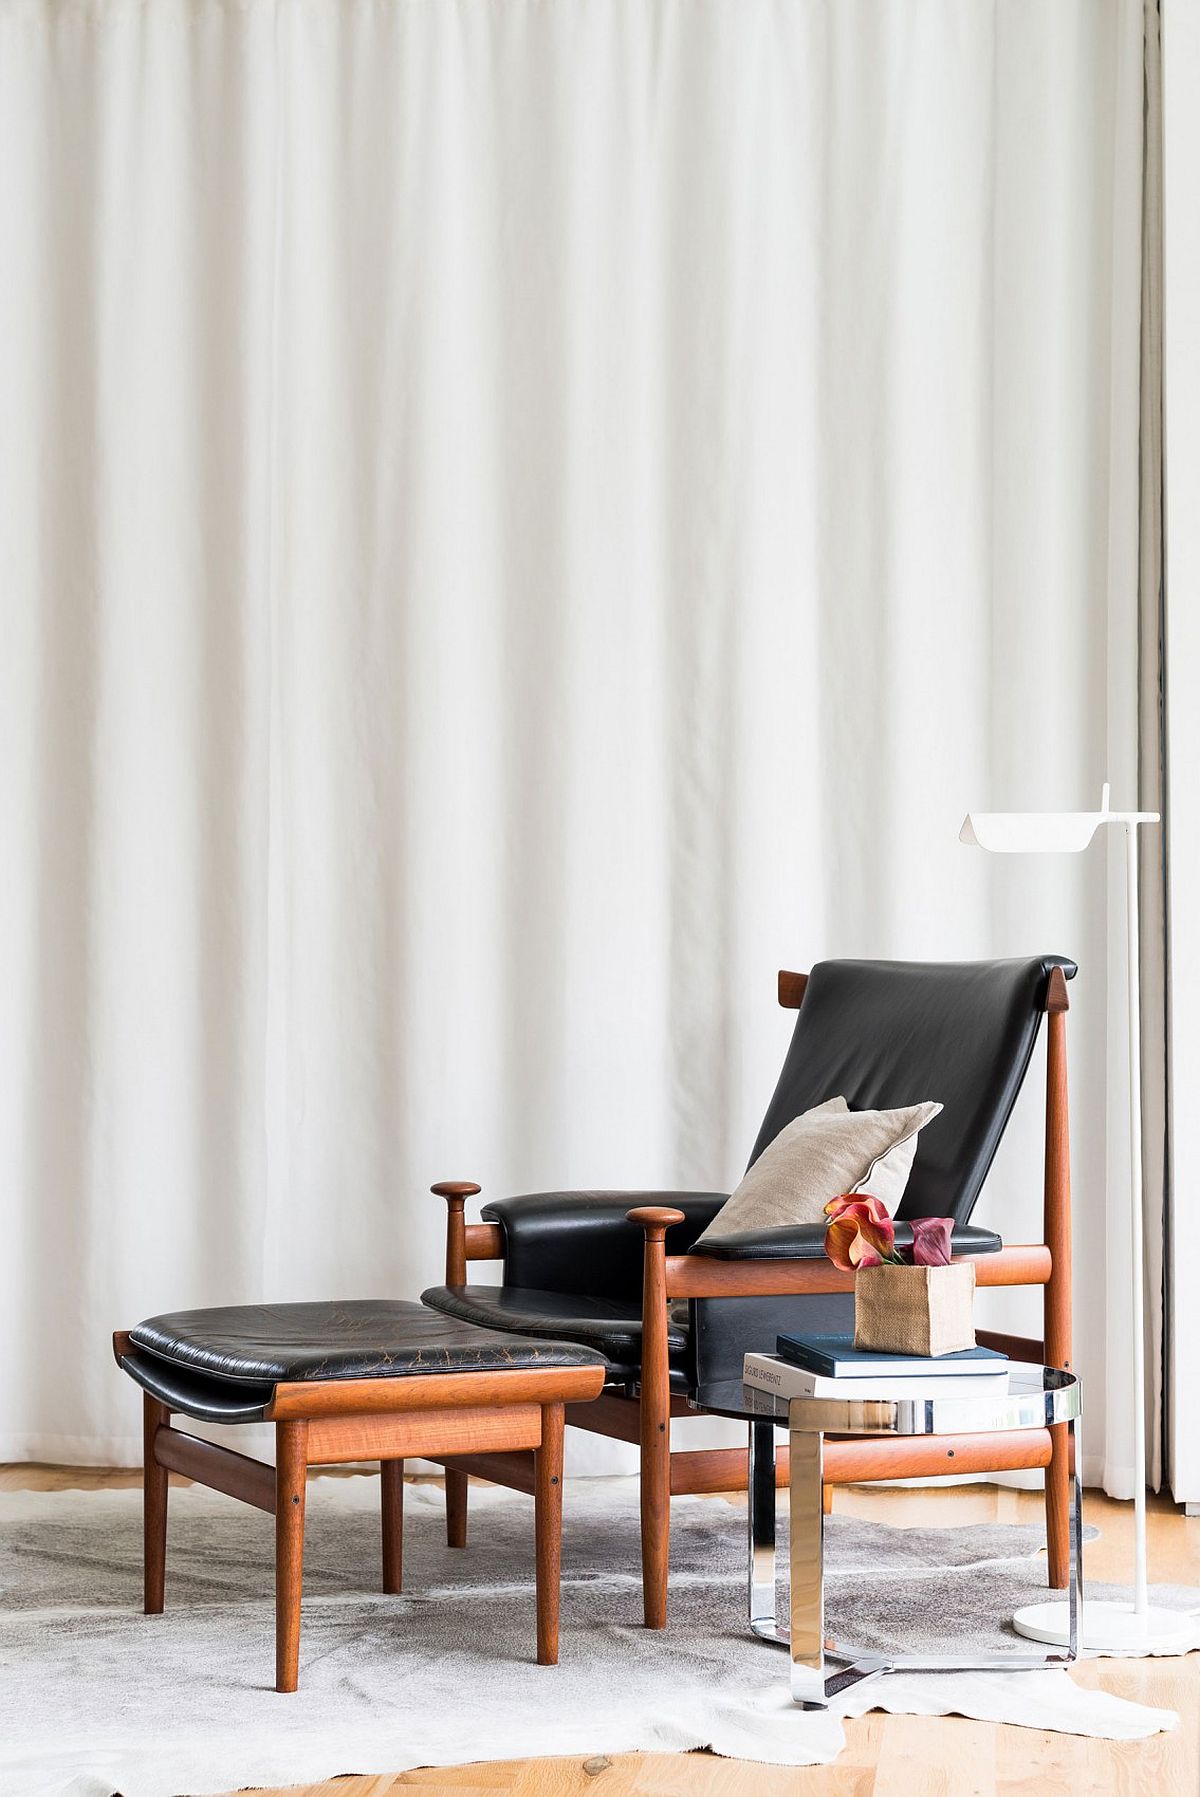 Craft a classy reading nook with confortable lounger and a simple side table